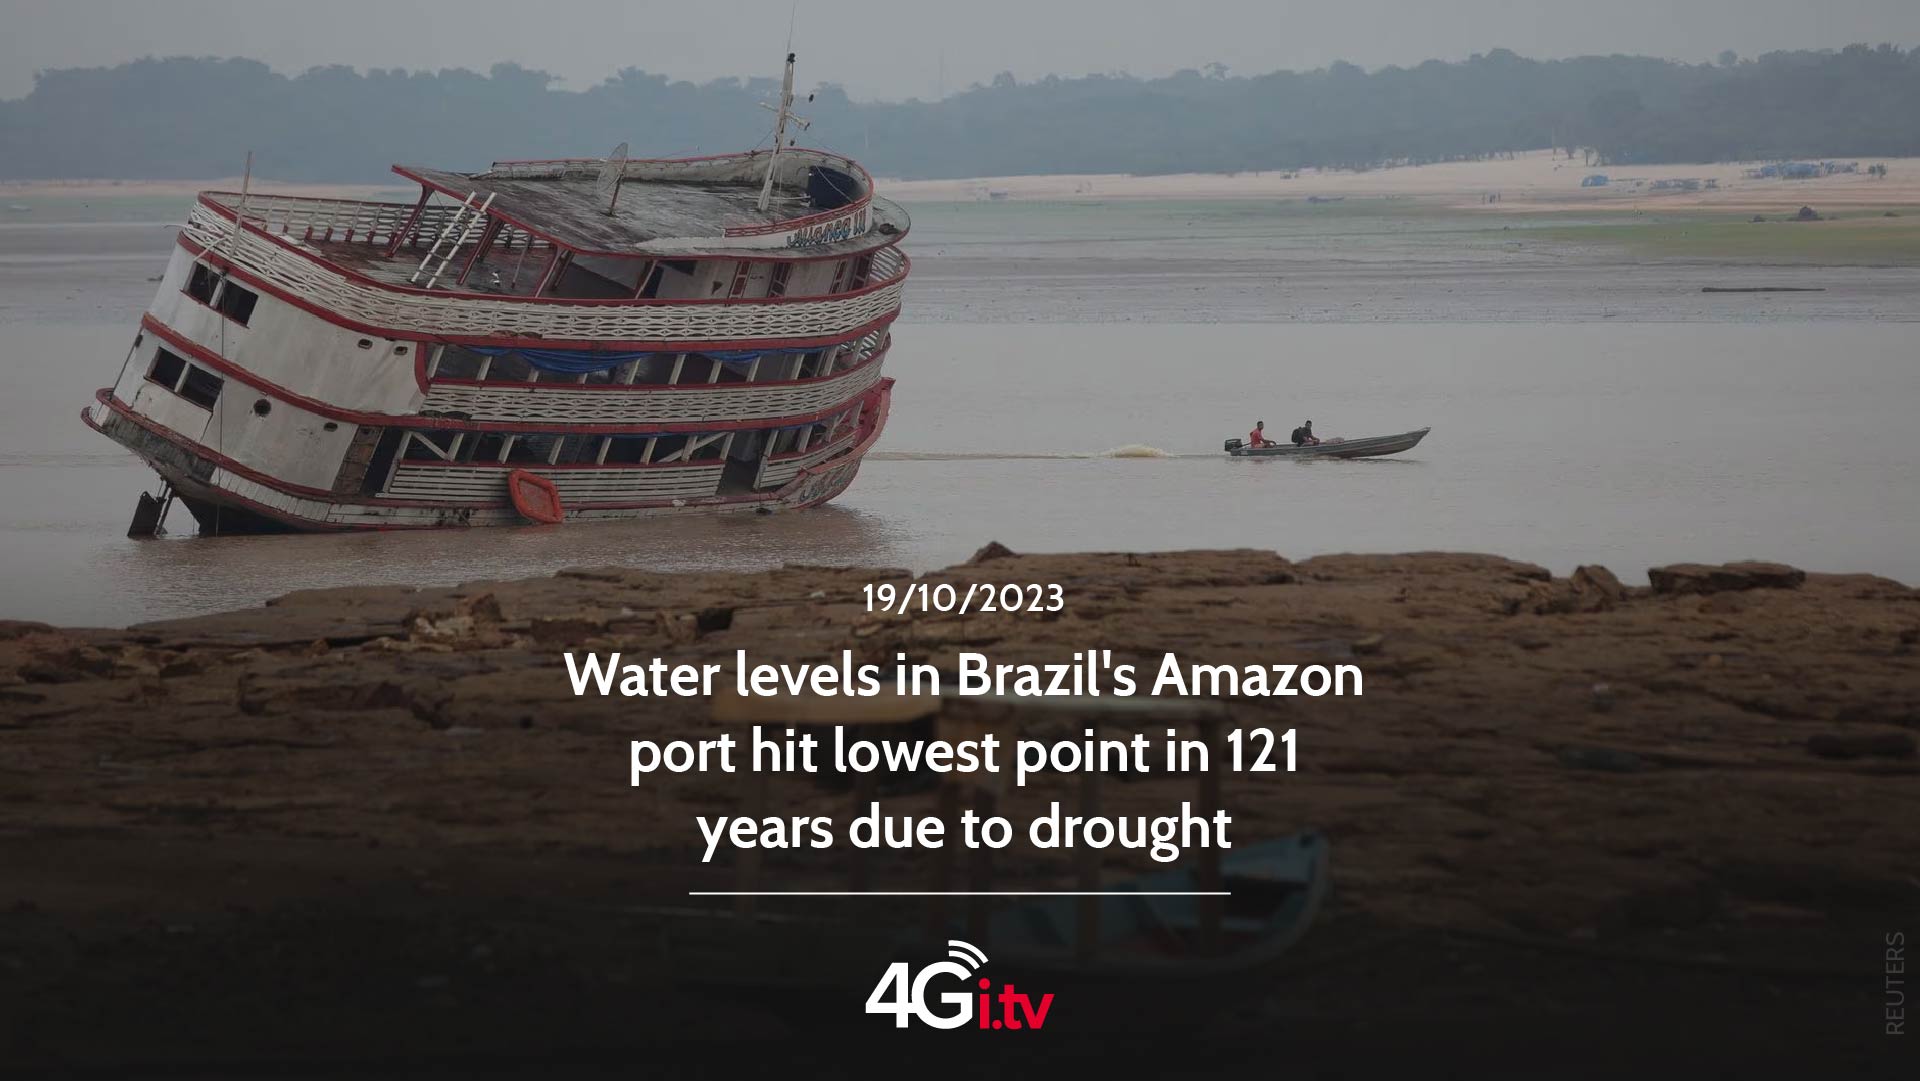 Подробнее о статье Water levels in Brazil’s Amazon port hit lowest point in 121 years due to drought